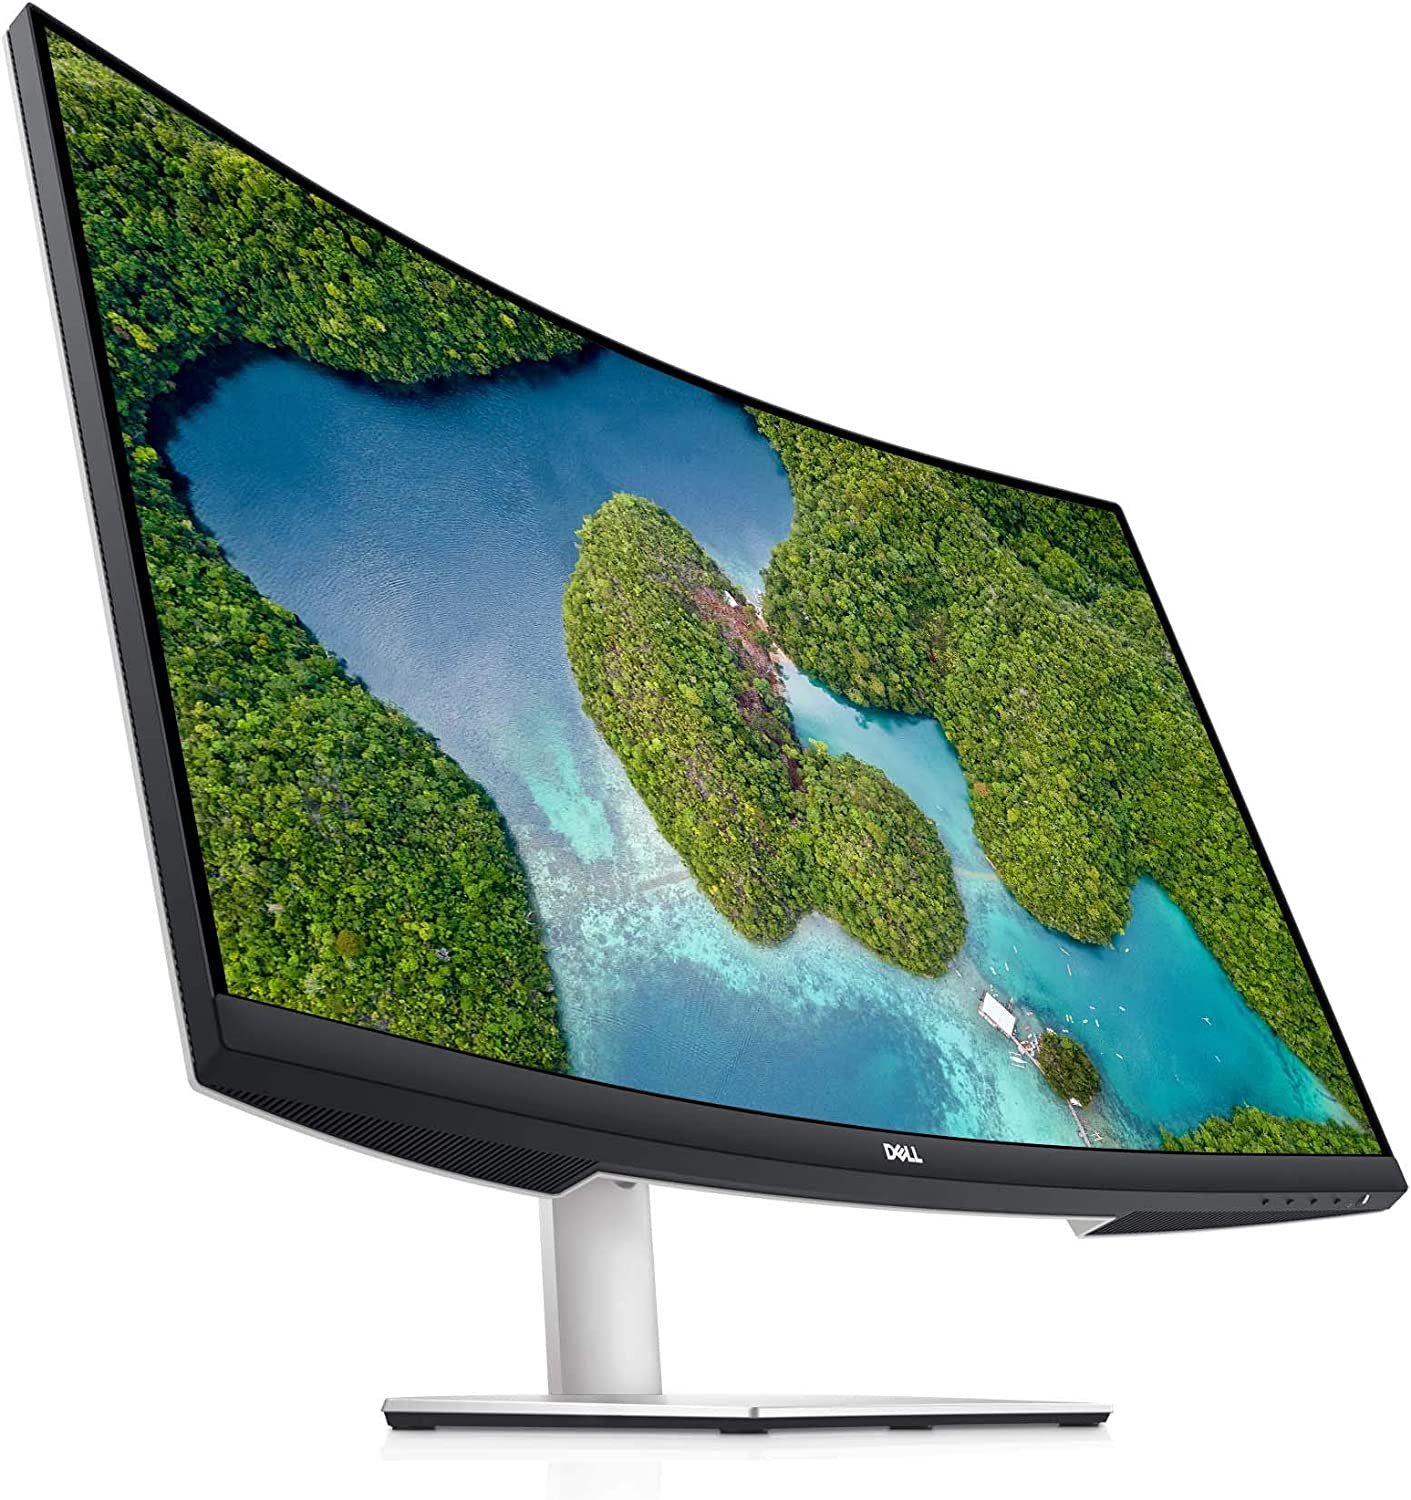 Review of the Dell 4K S3221QS Curved Monitor